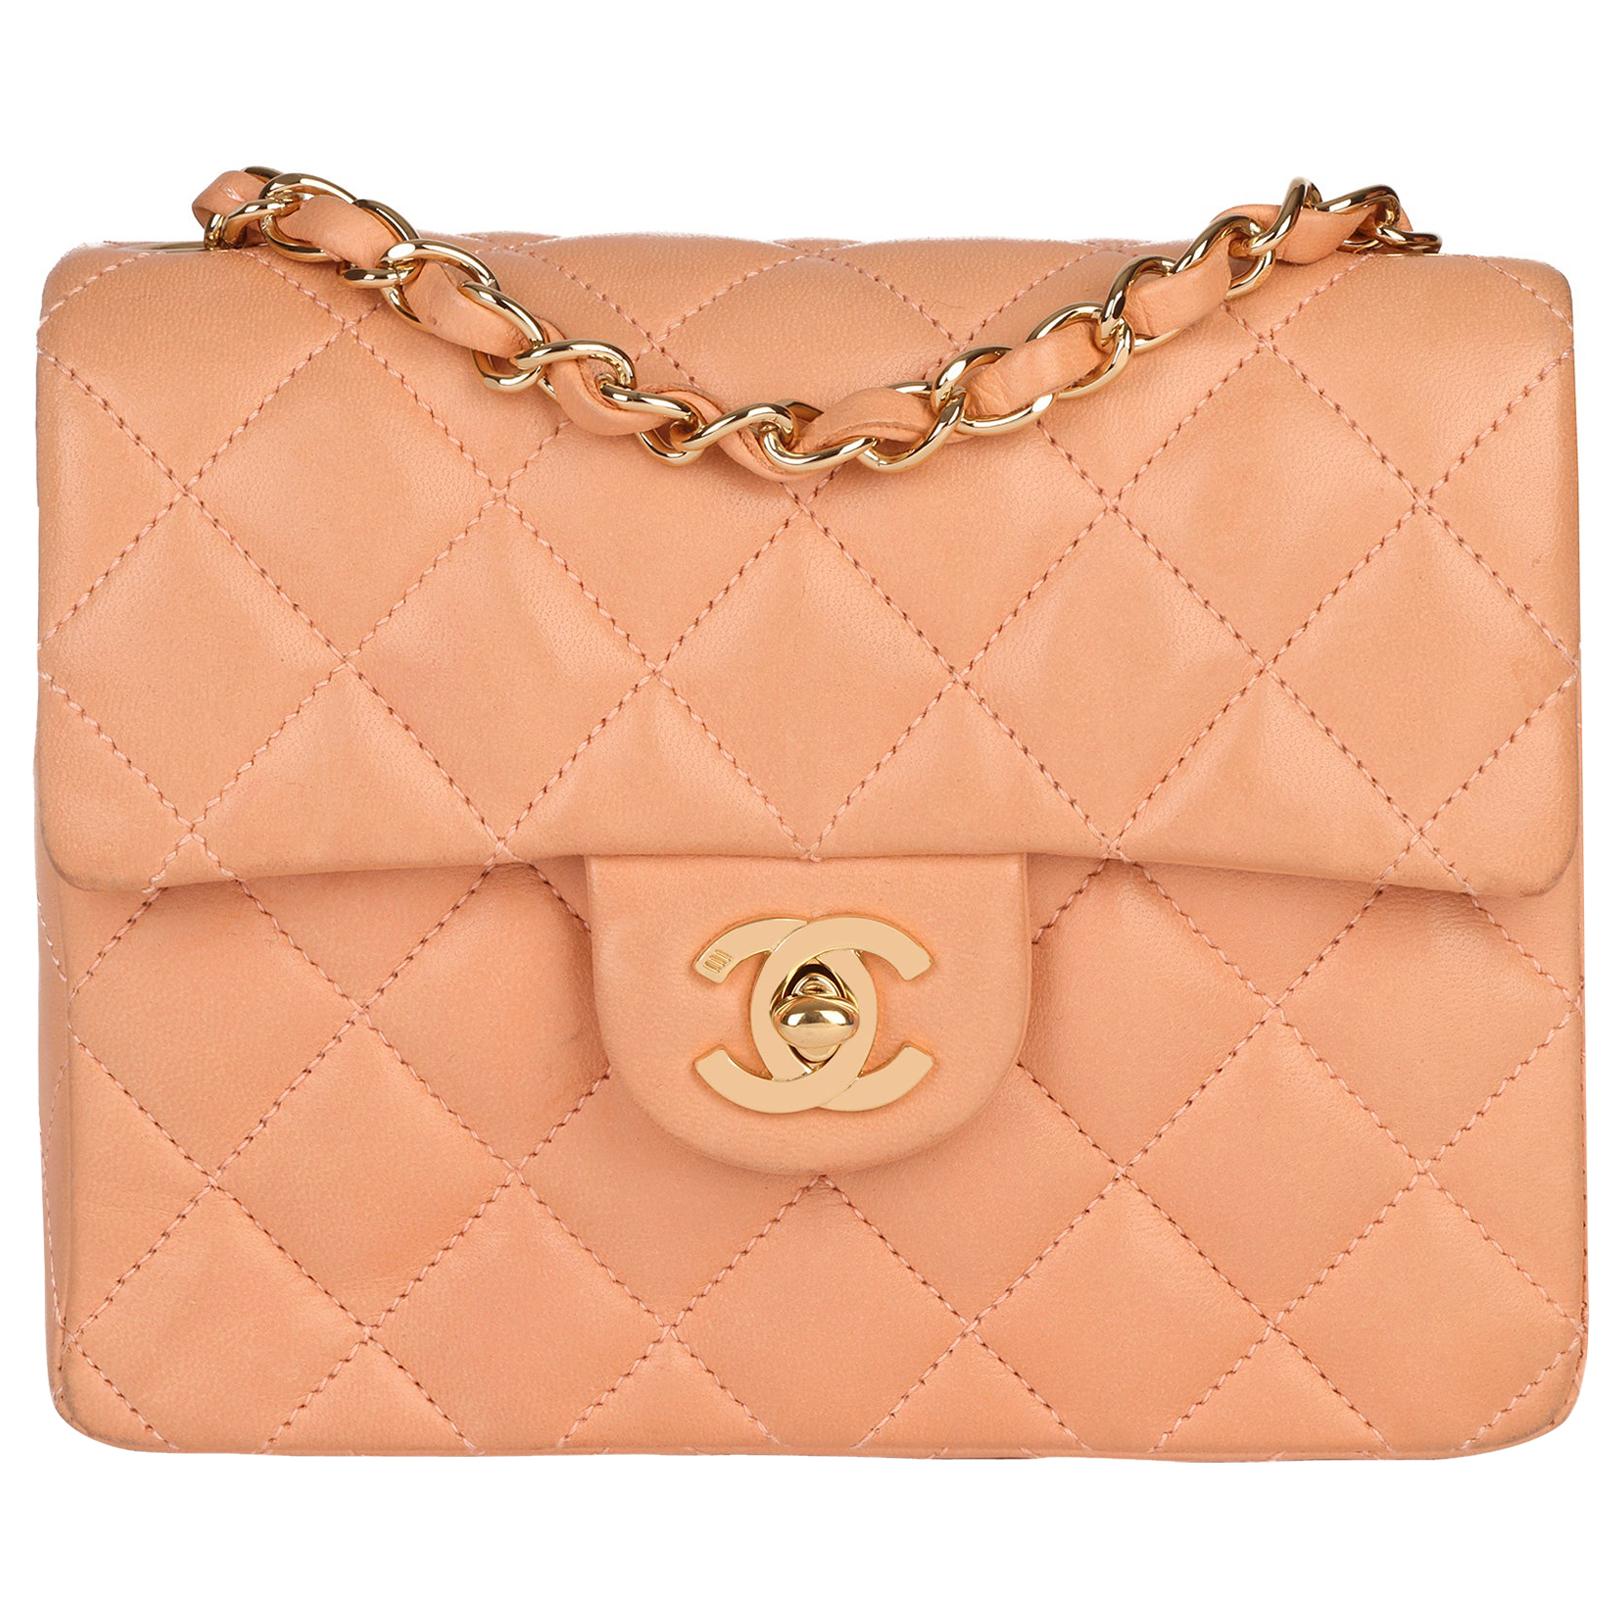 2005 Chanel Peach Quilted Lambskin Leather Vintage Mini Flap Bag 